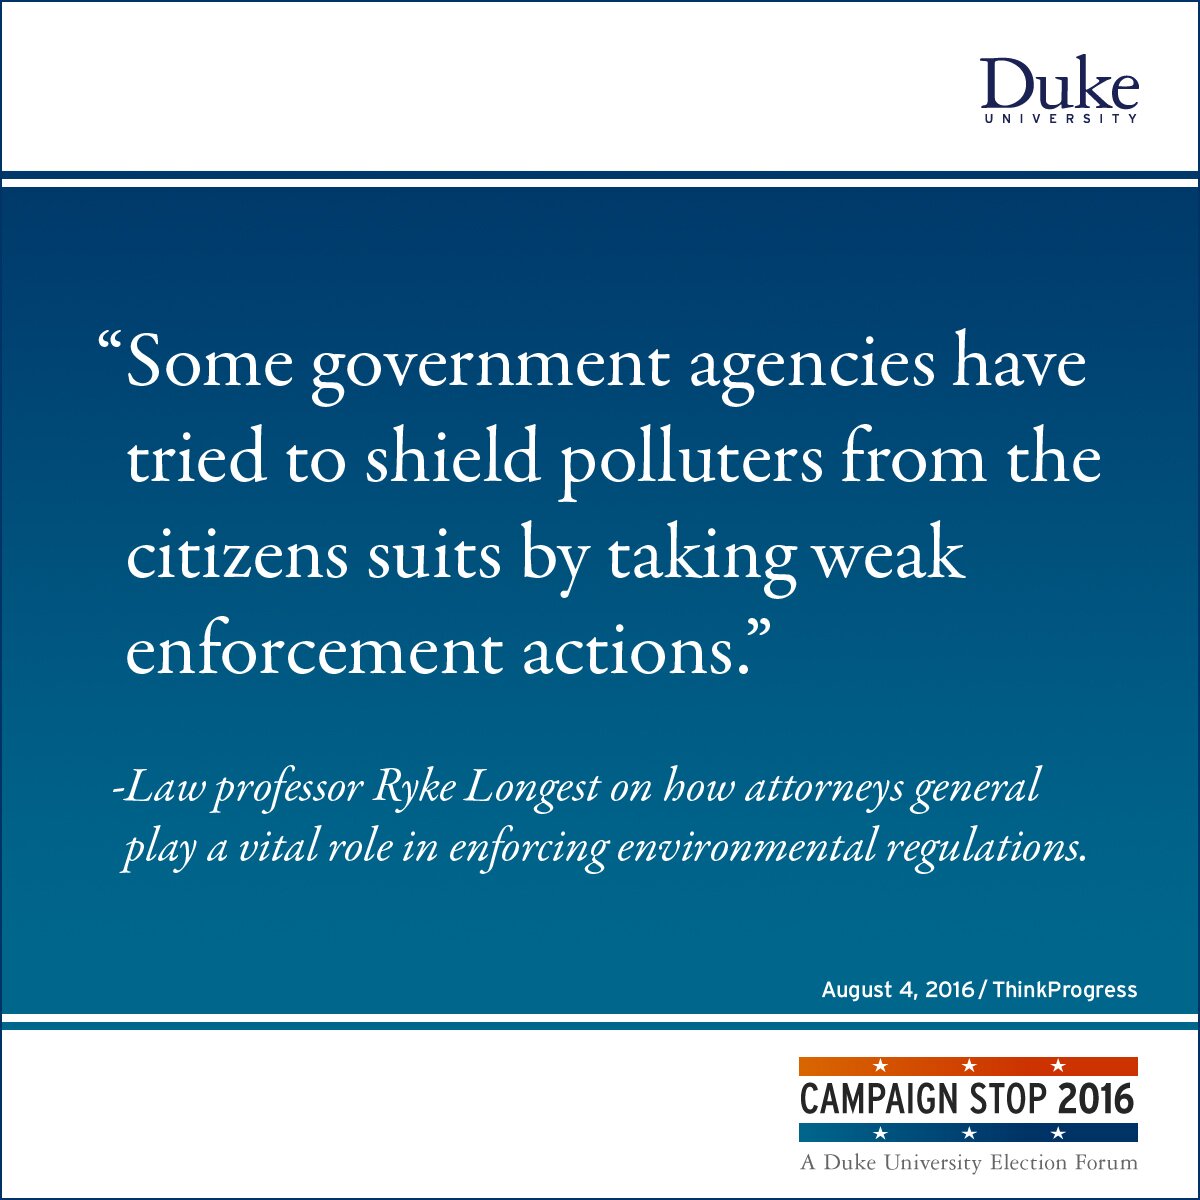 “Some government agencies have tried to shield polluters from the citizens suits by taking weak enforcement actions.” -Law professor Ryke Longest on how attorneys general play a vital role in enforcing environmental regulations.